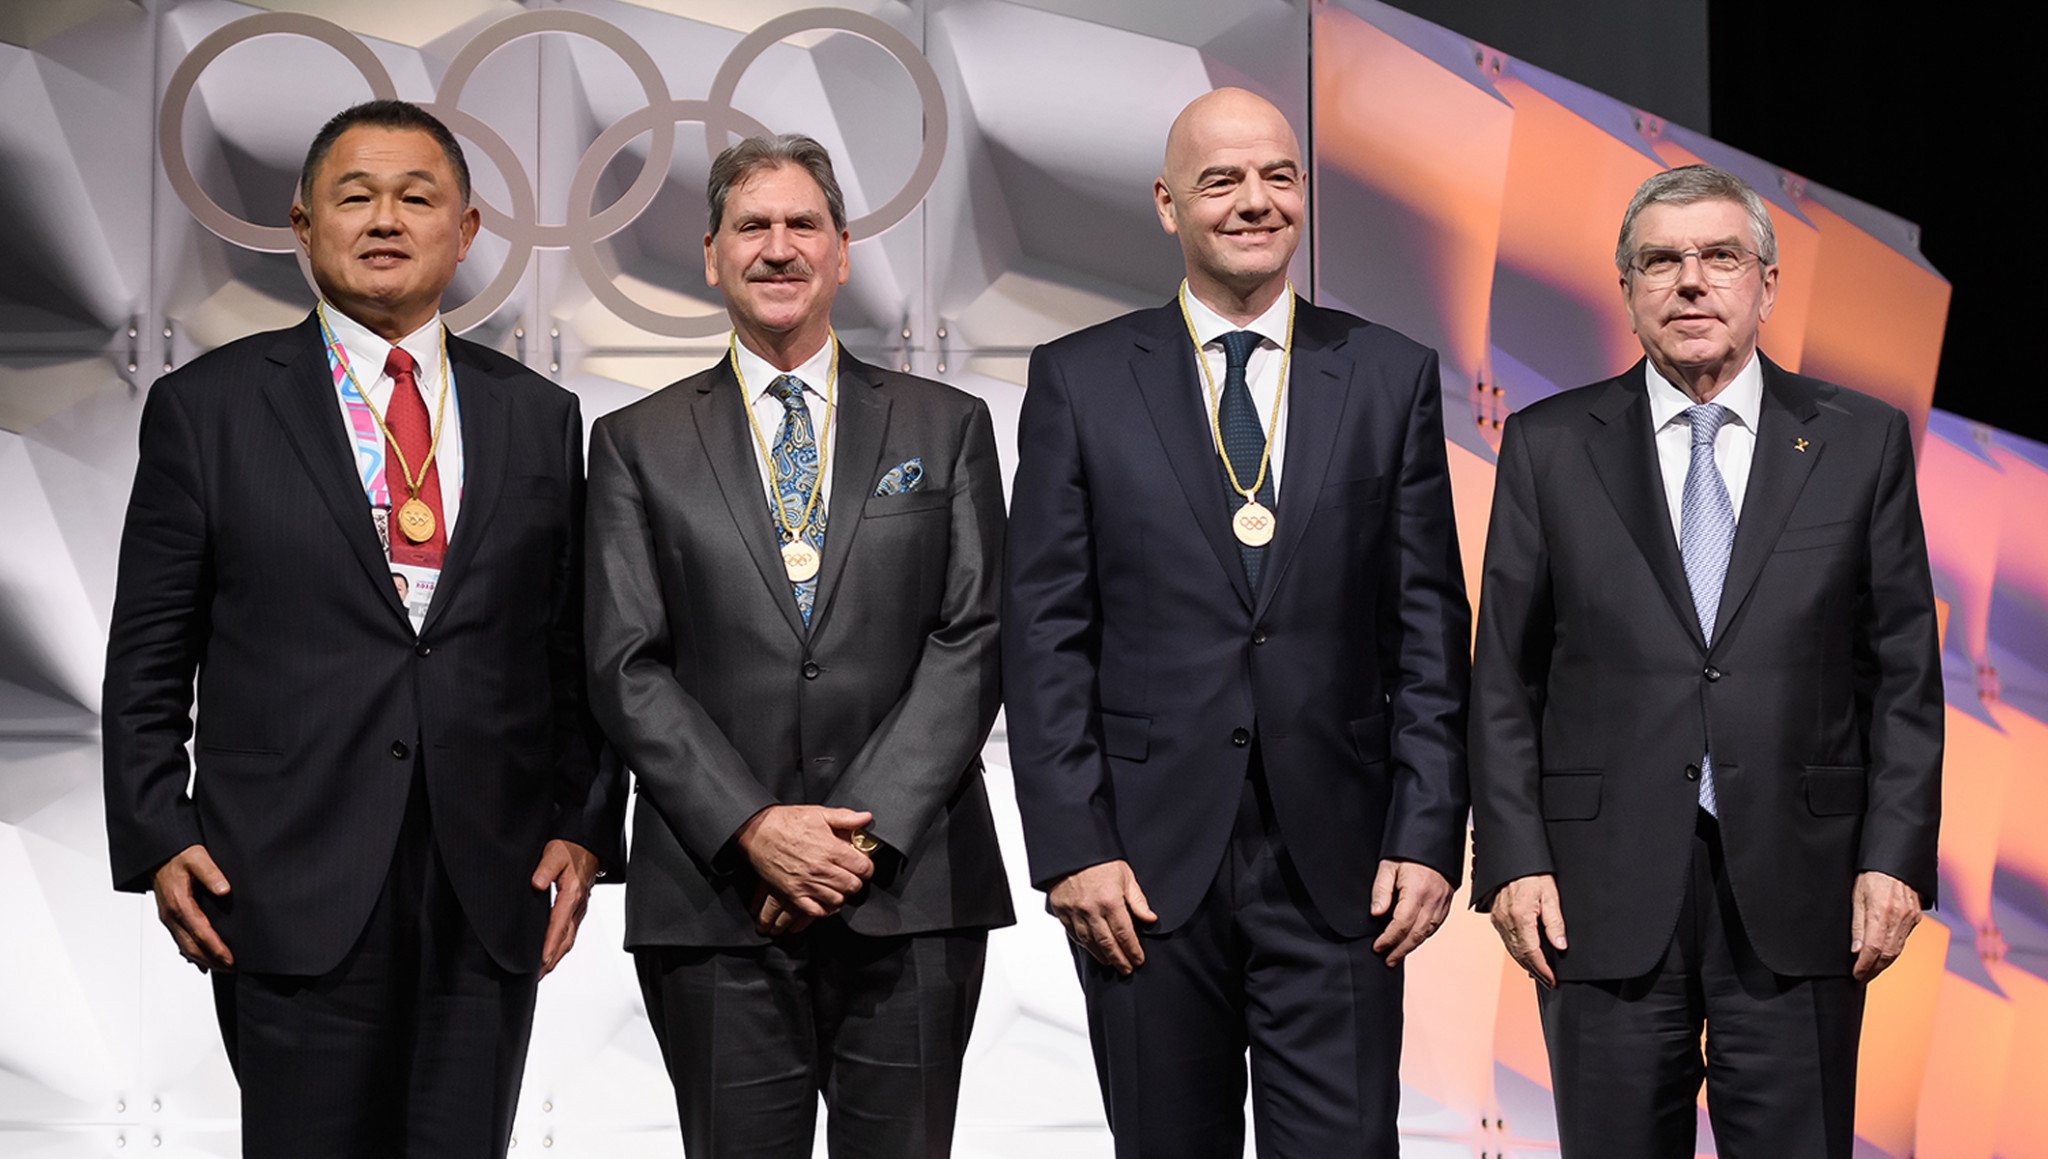 Three members were elected to the IOC at its Session Lausanne today ©IOC